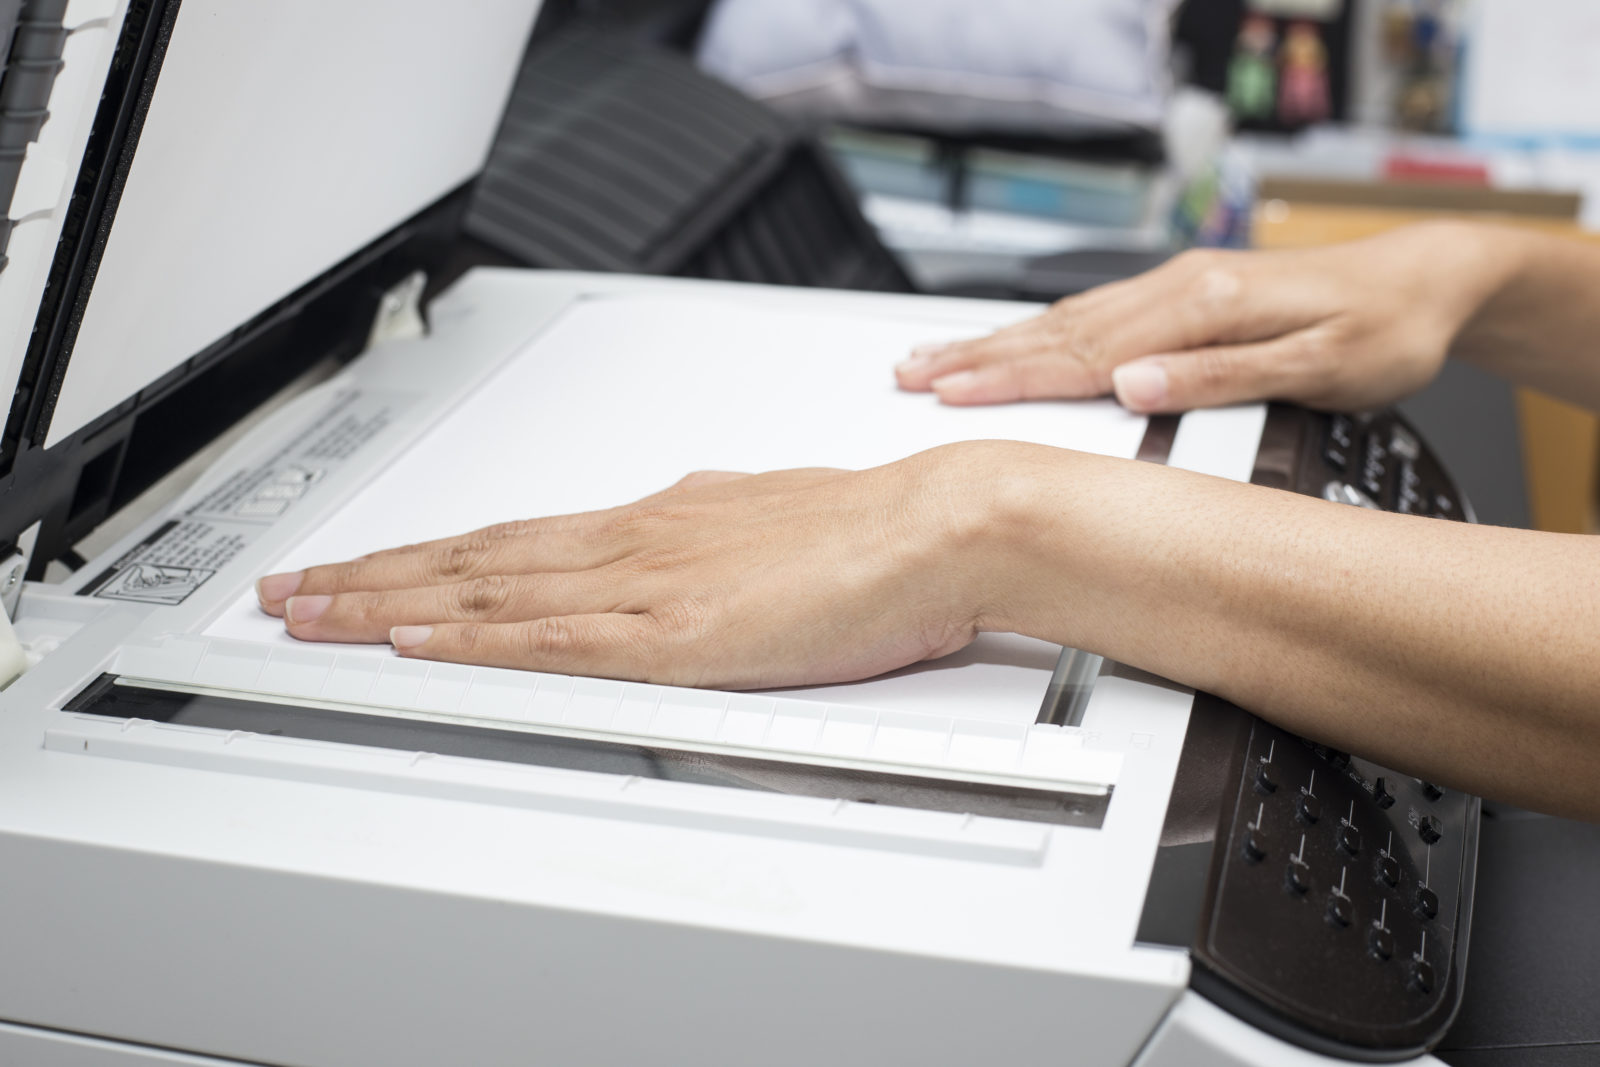 Learn about document scanning services and how they work.